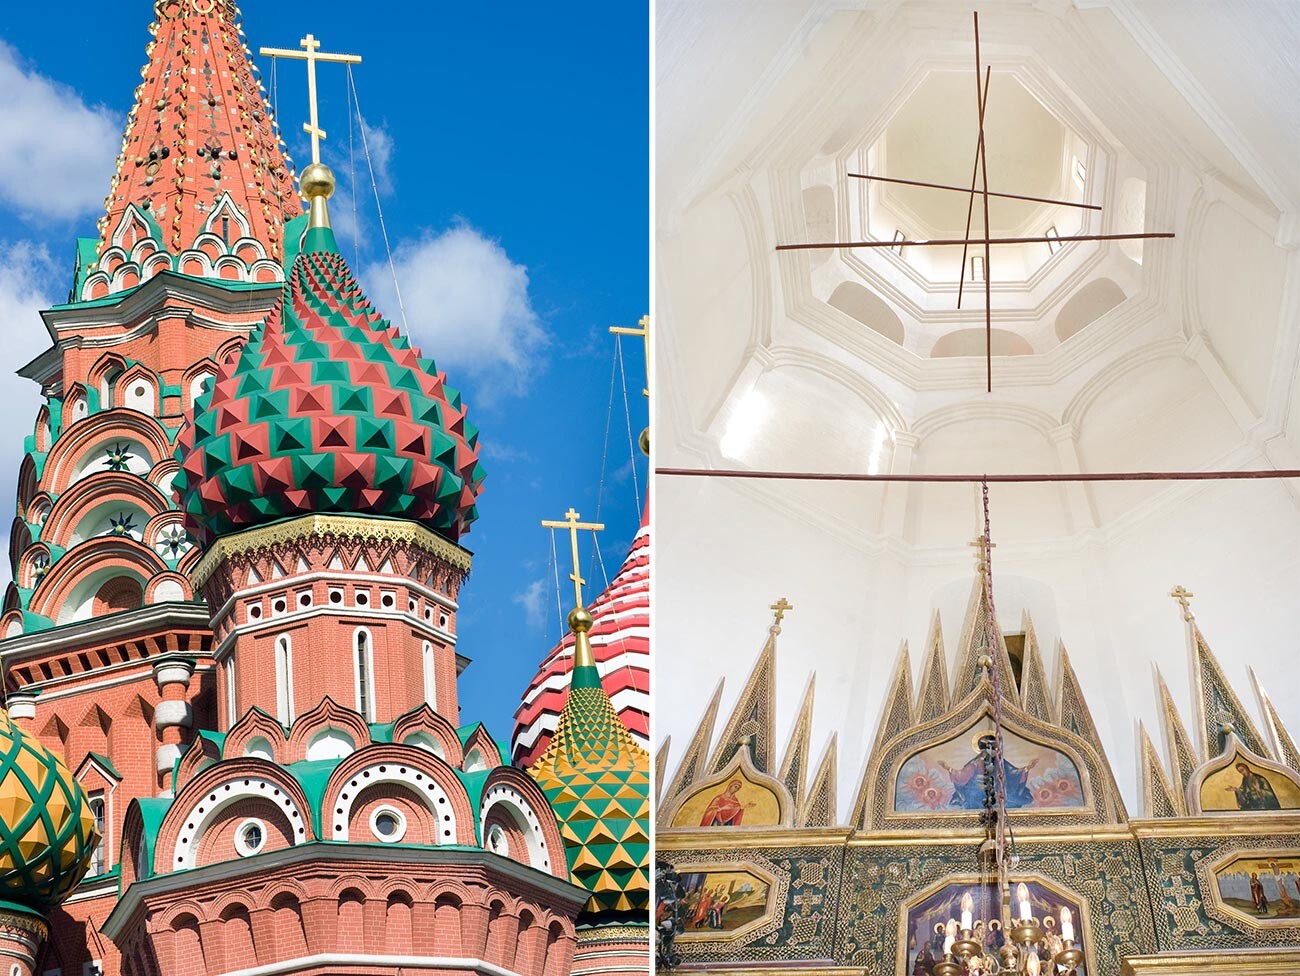 Left: St. Basil's, Church of Entry into Jerusalem, northwest view. 
Right: St. Basil's, Church of Entry into Jerusalem, interior. View toward dome with upper tier of 19th-century icon screen. 2012